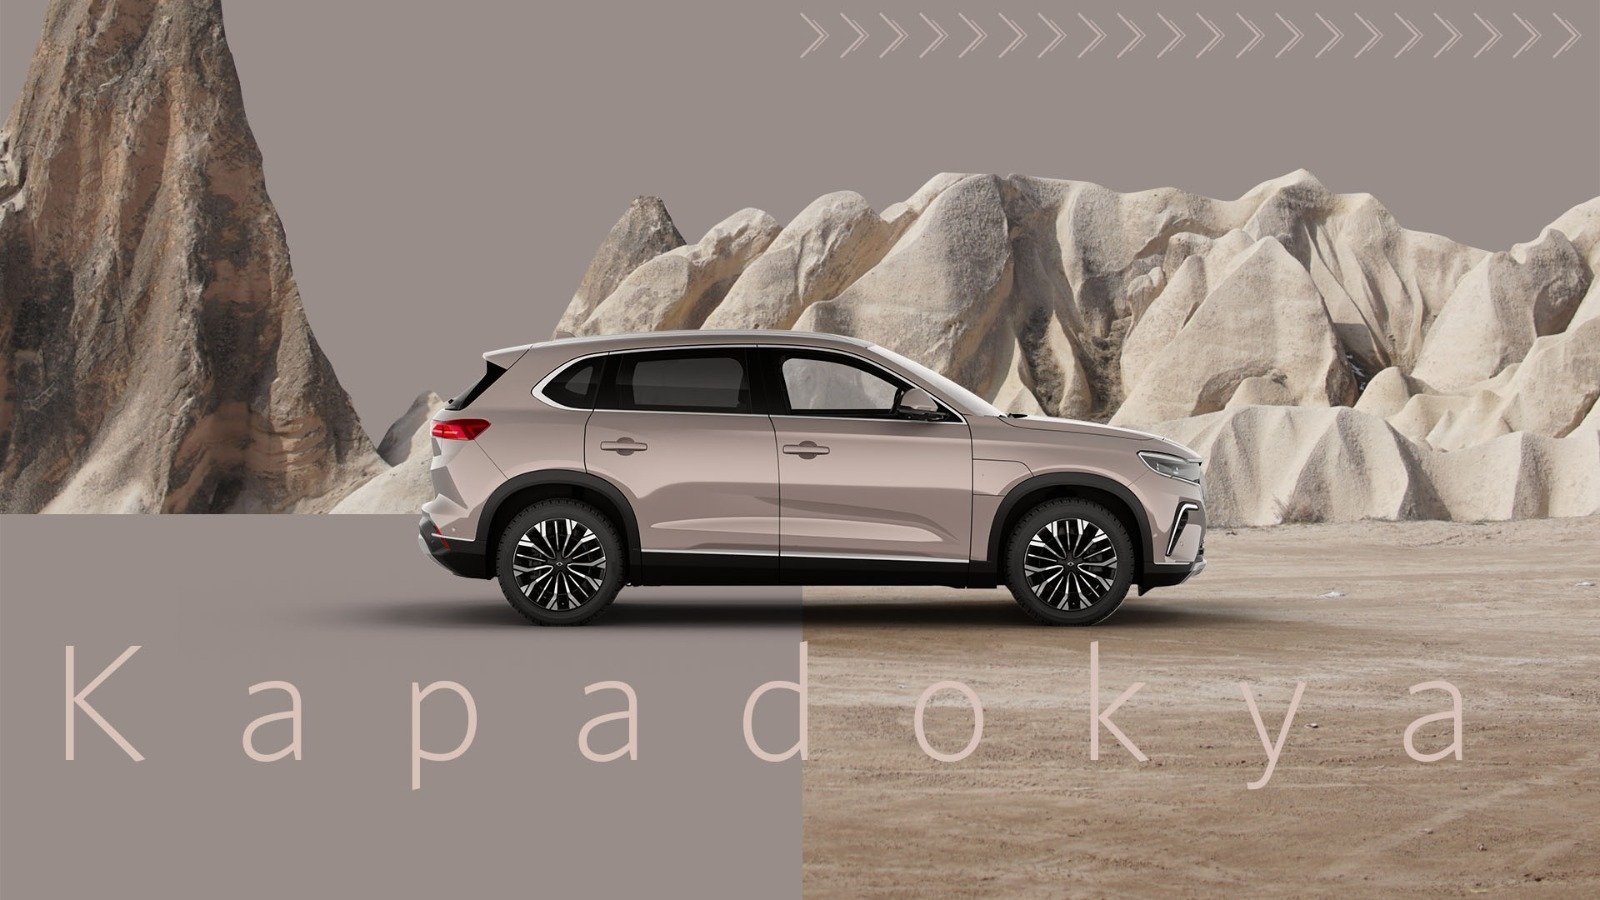 A Togg SUV model seen with the &quot;Kapadokya&quot; (Cappadocia) color scheme. (Courtesy of Togg)